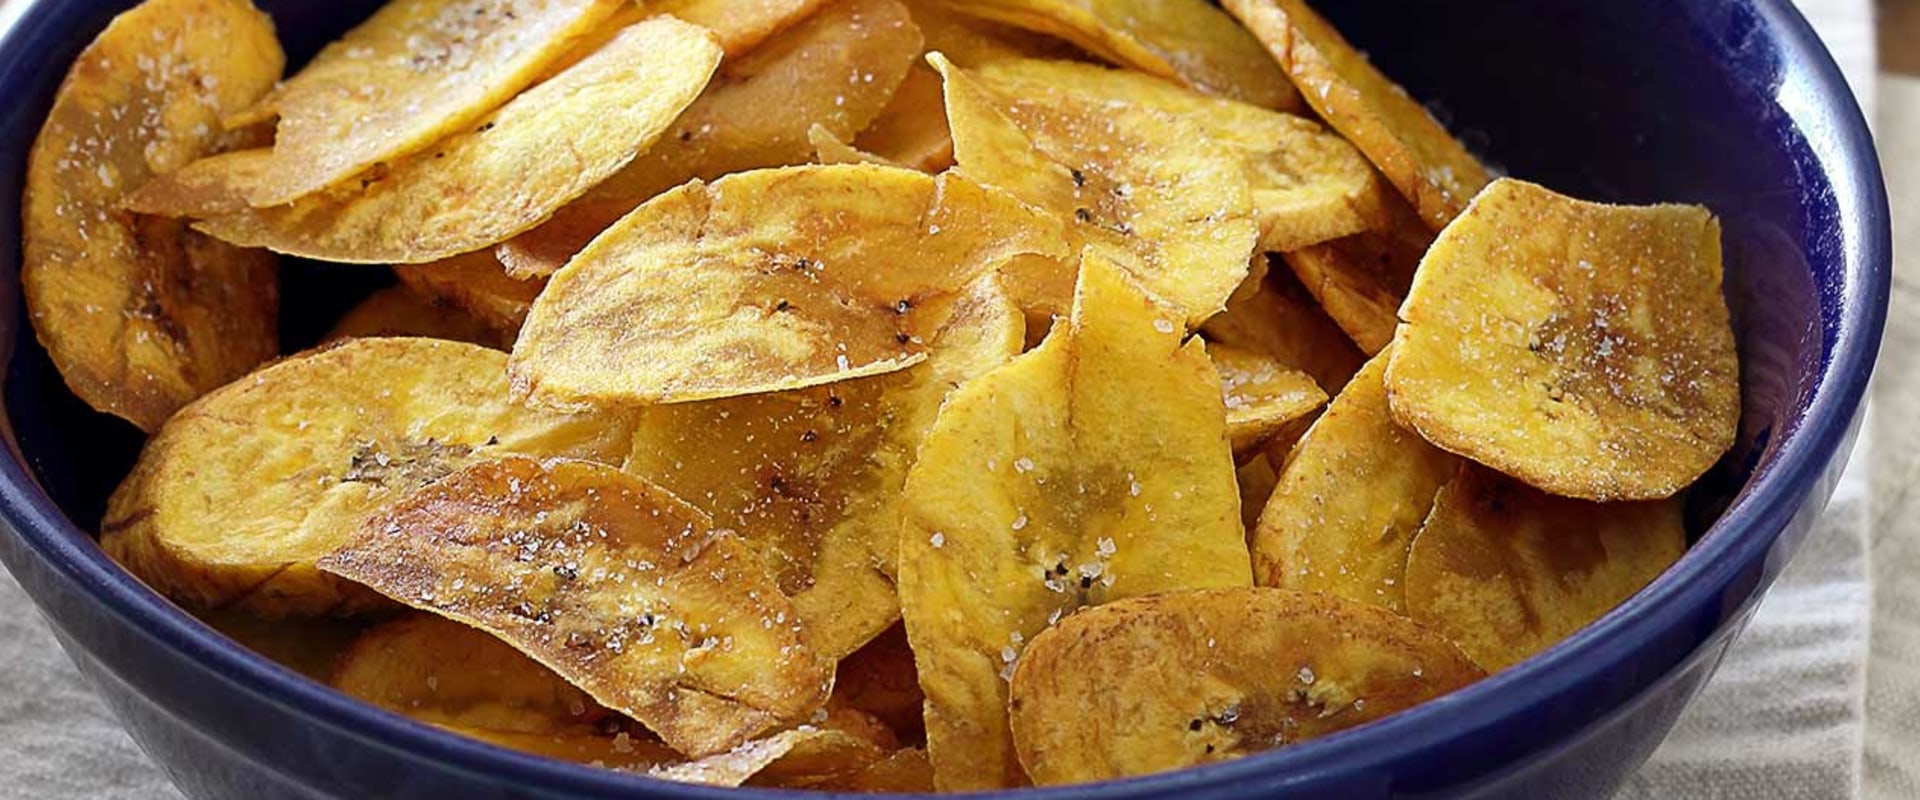 What chips can you eat on paleo?